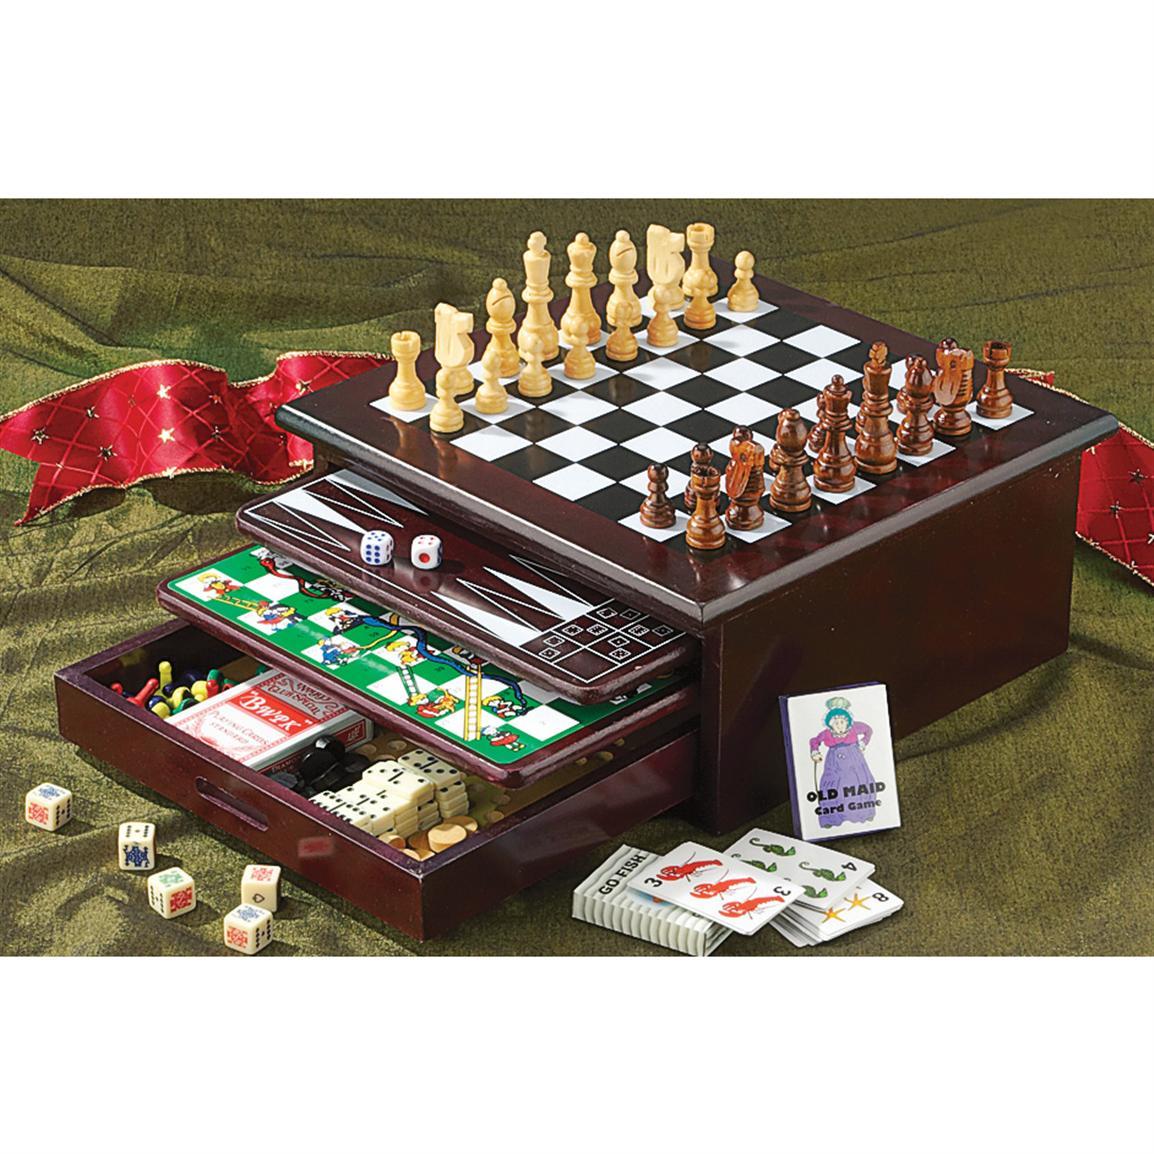 Board Game Set - Deluxe 15 in 1 Wood Tabletop Games with Storage -Checkers,  Chess, Chinese Checkers, Parcheesi, TicTacToe, Solitaire, Snakes and